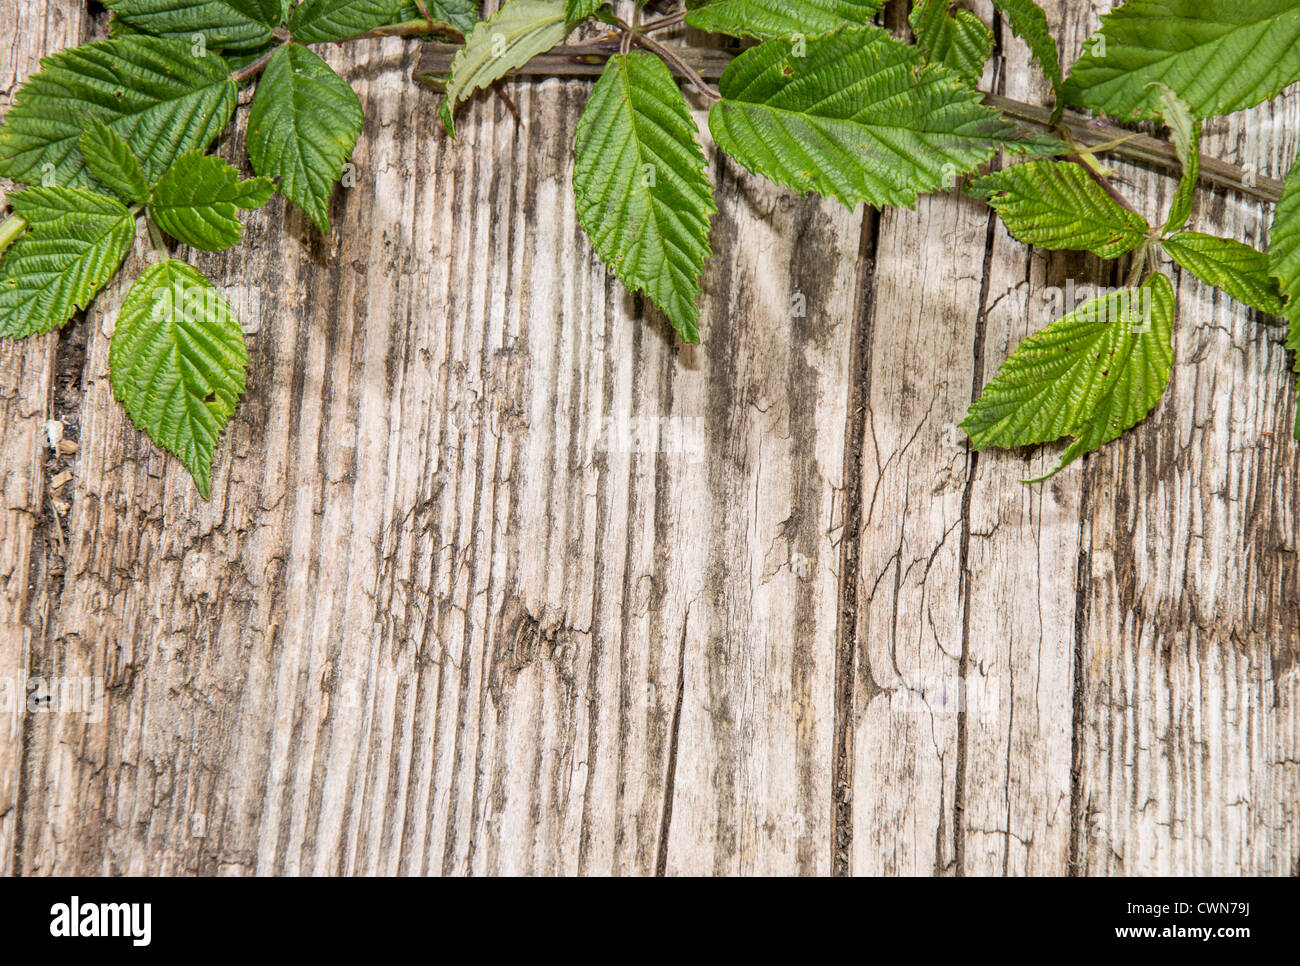 Some Blackberry Leaves on wooden background Stock Photo